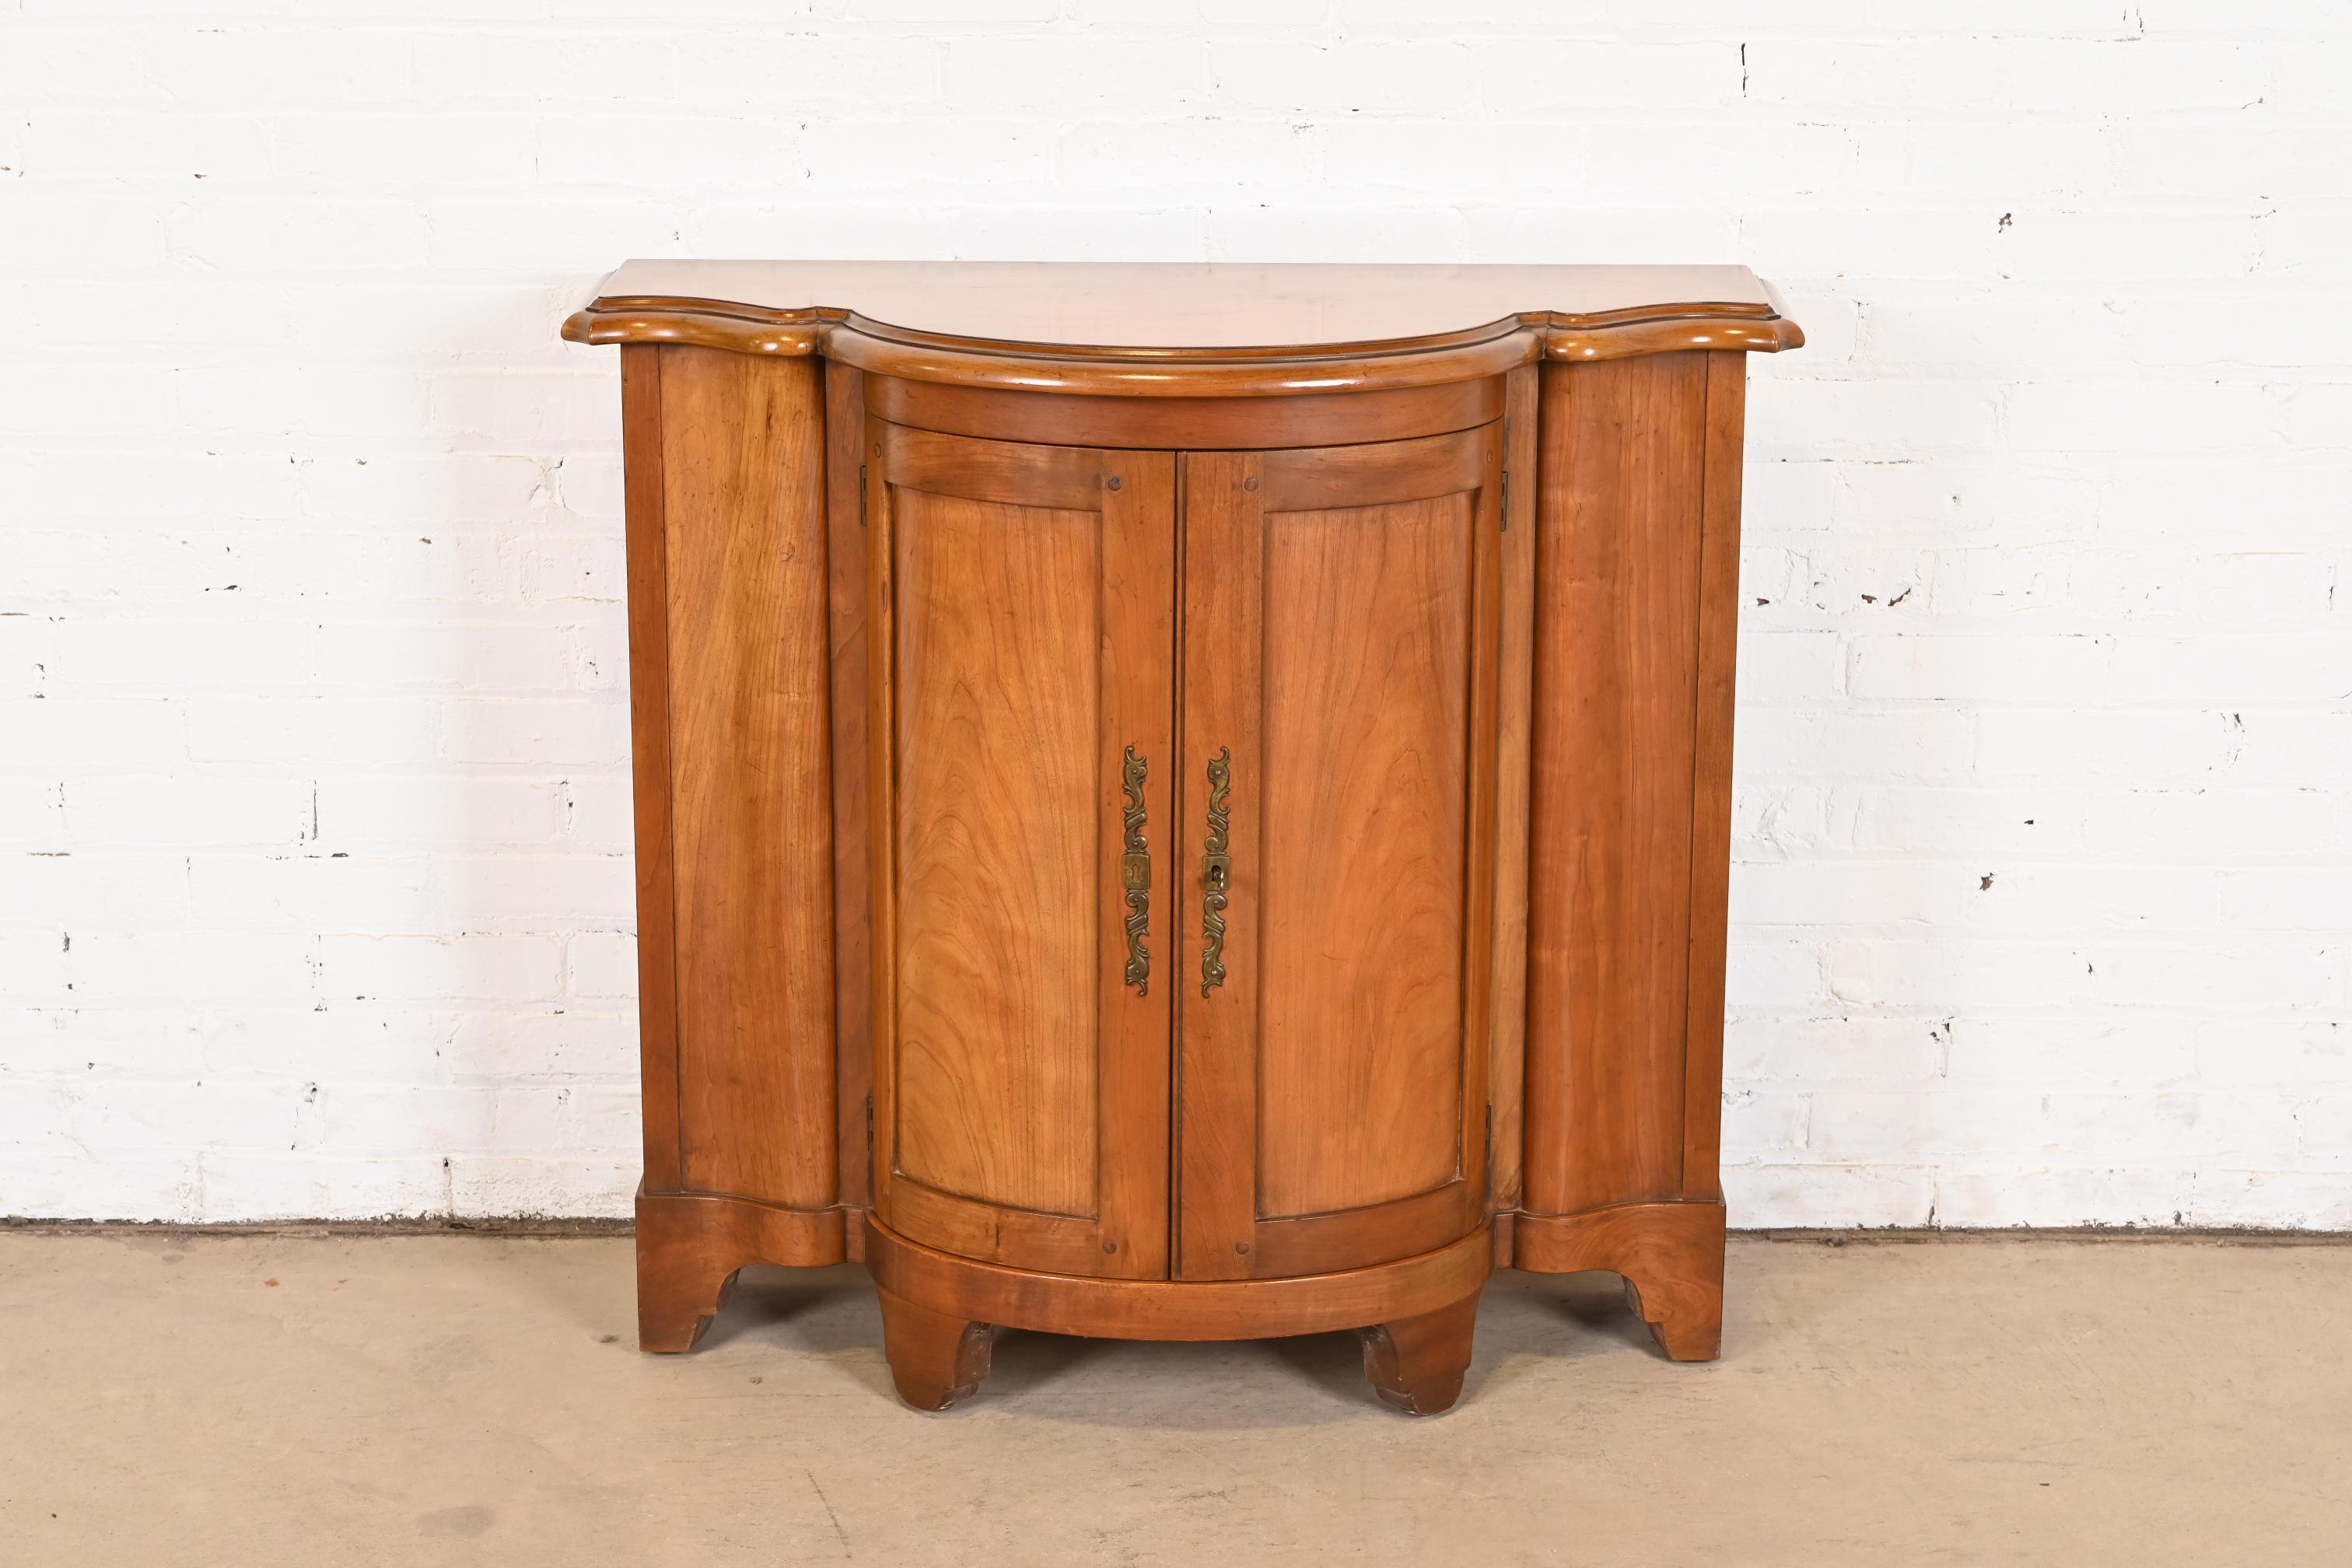 A gorgeous Regency or Georgian style demilune console or bar cabinet

By Baker Furniture

USA, Circa 1980s

Carved cherry wood, with original brass hardware.

Measures: 37.25